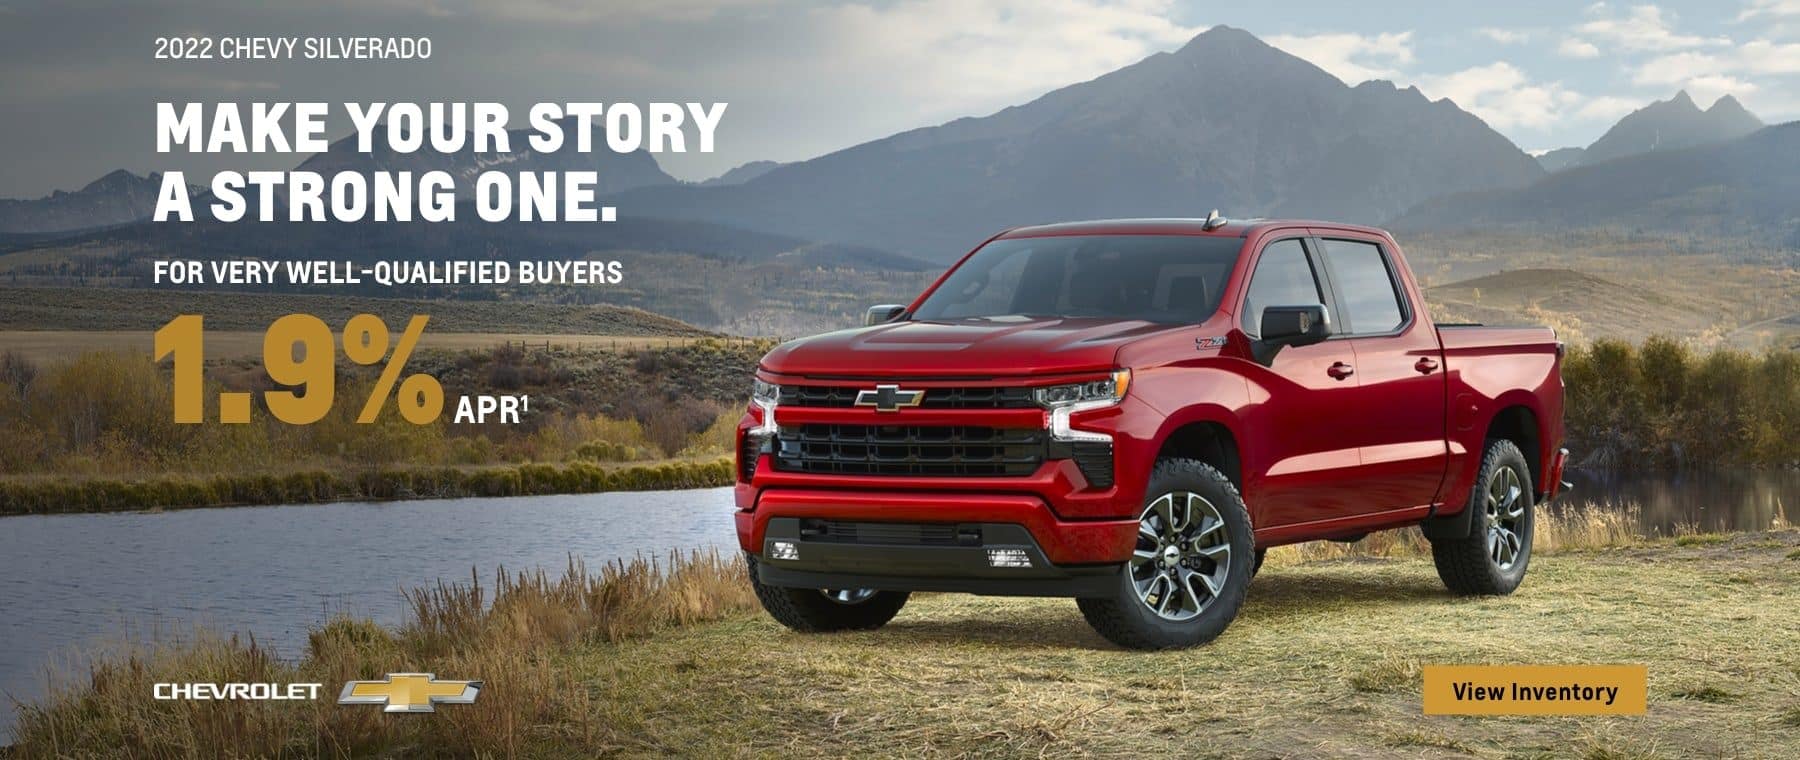 2022 Chevy Silverado 1500 Crew Cab. Make your story a strong one. For very well-qualified buyers 1.9% APR.